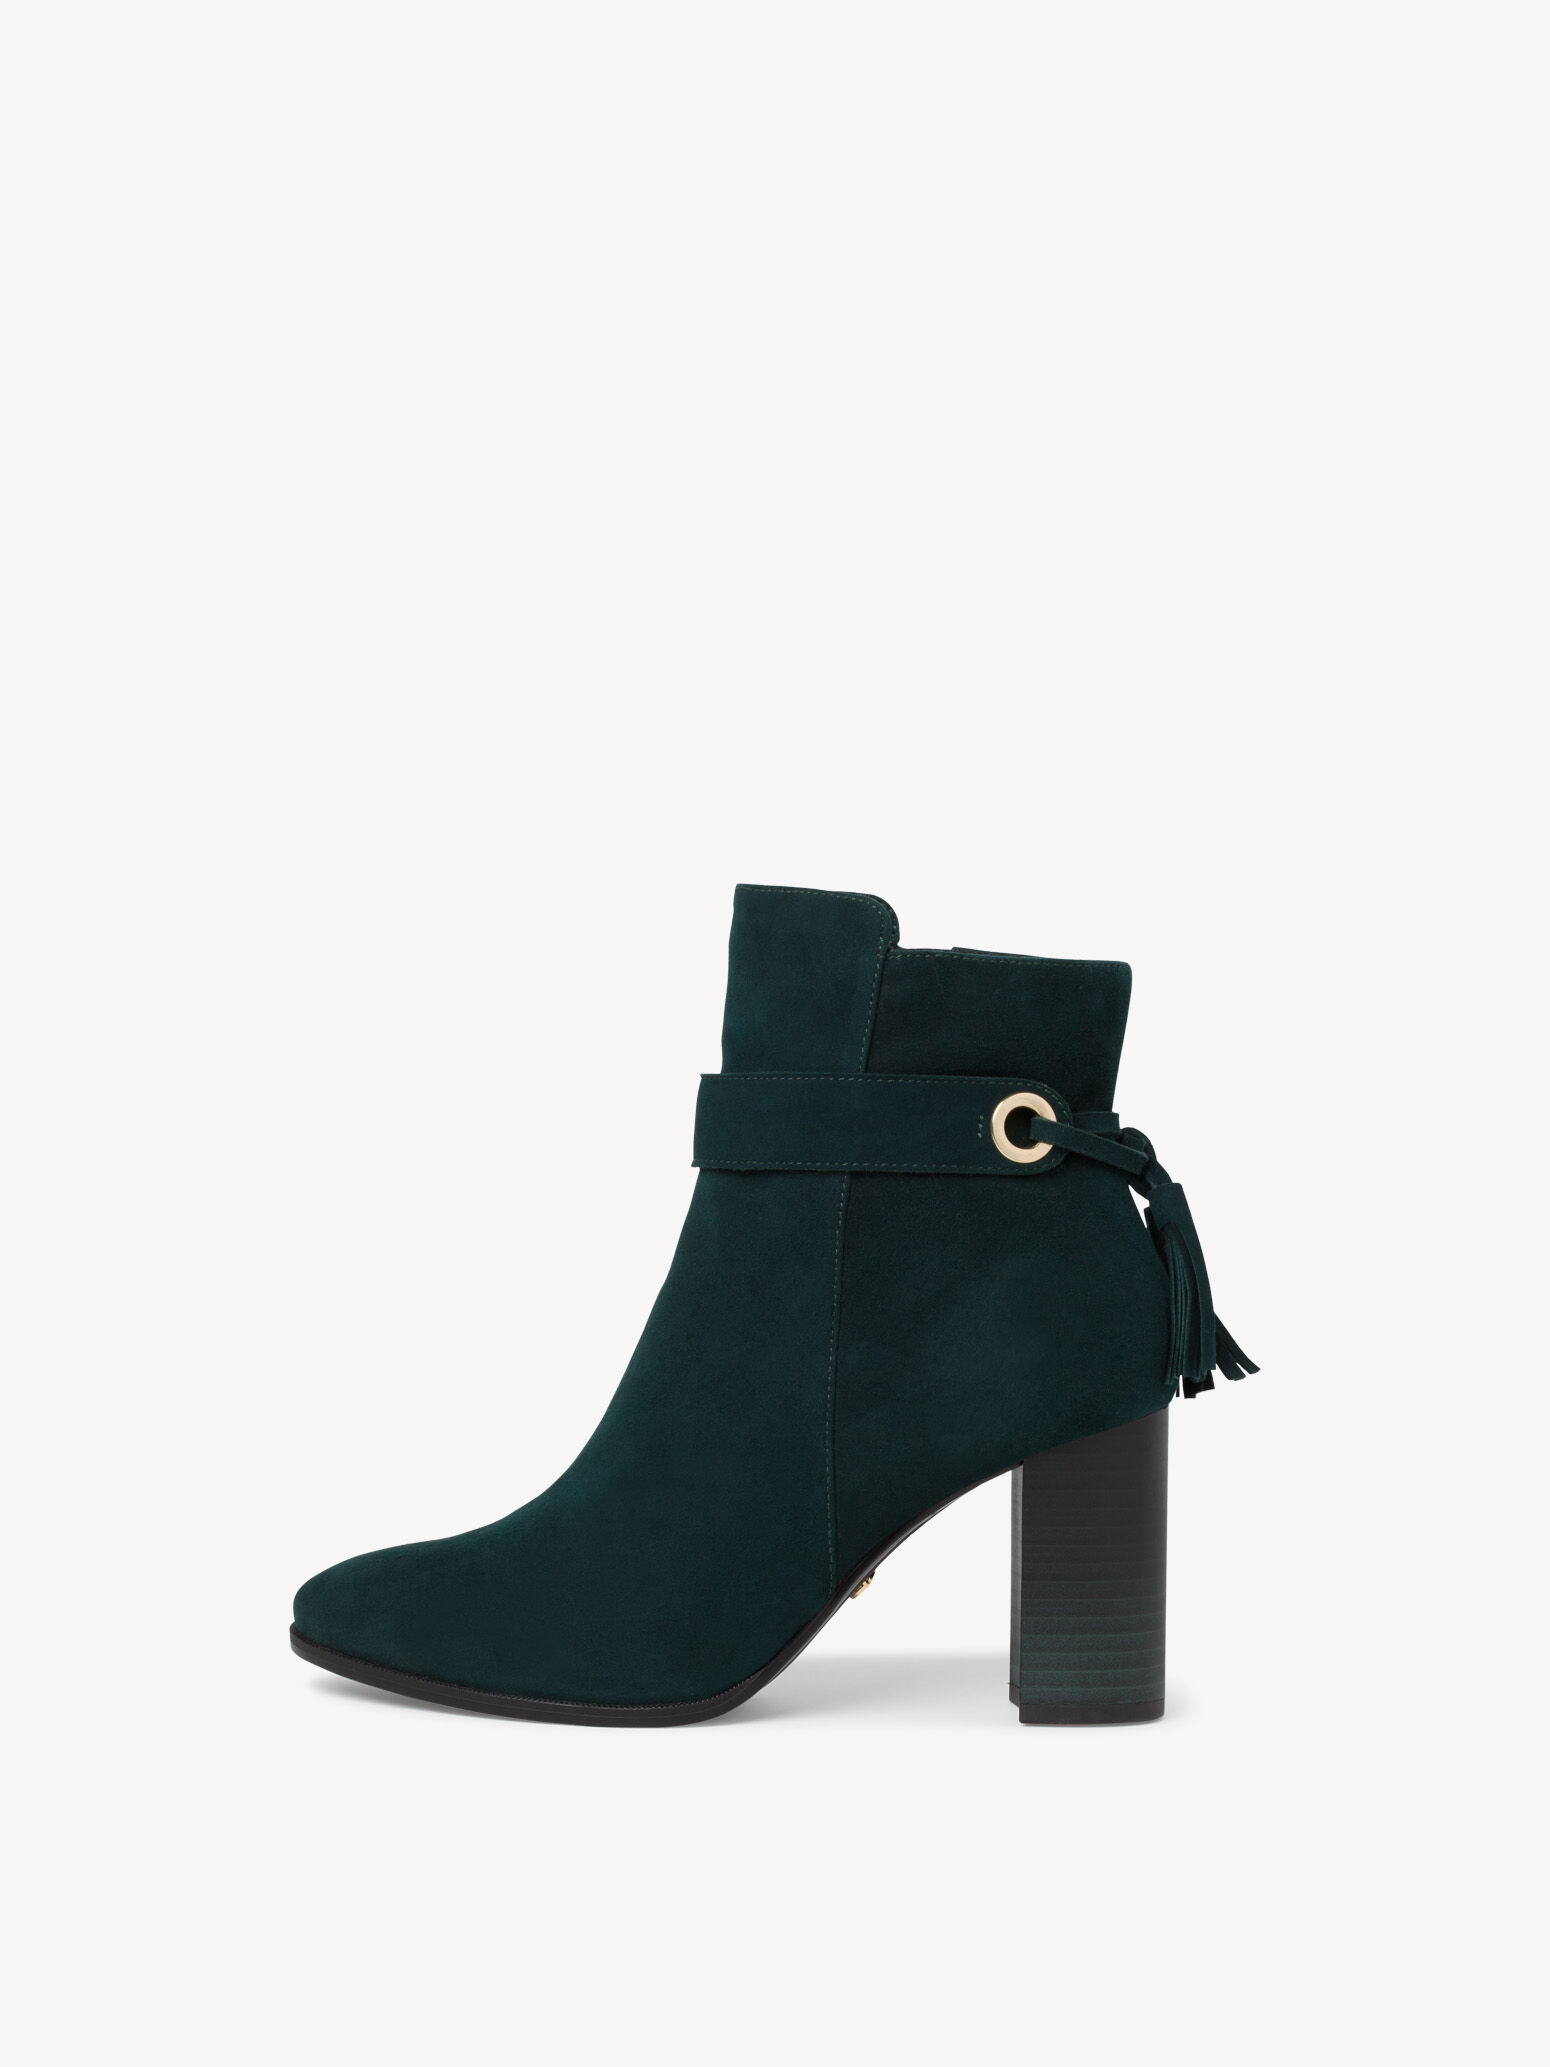 green leather booties